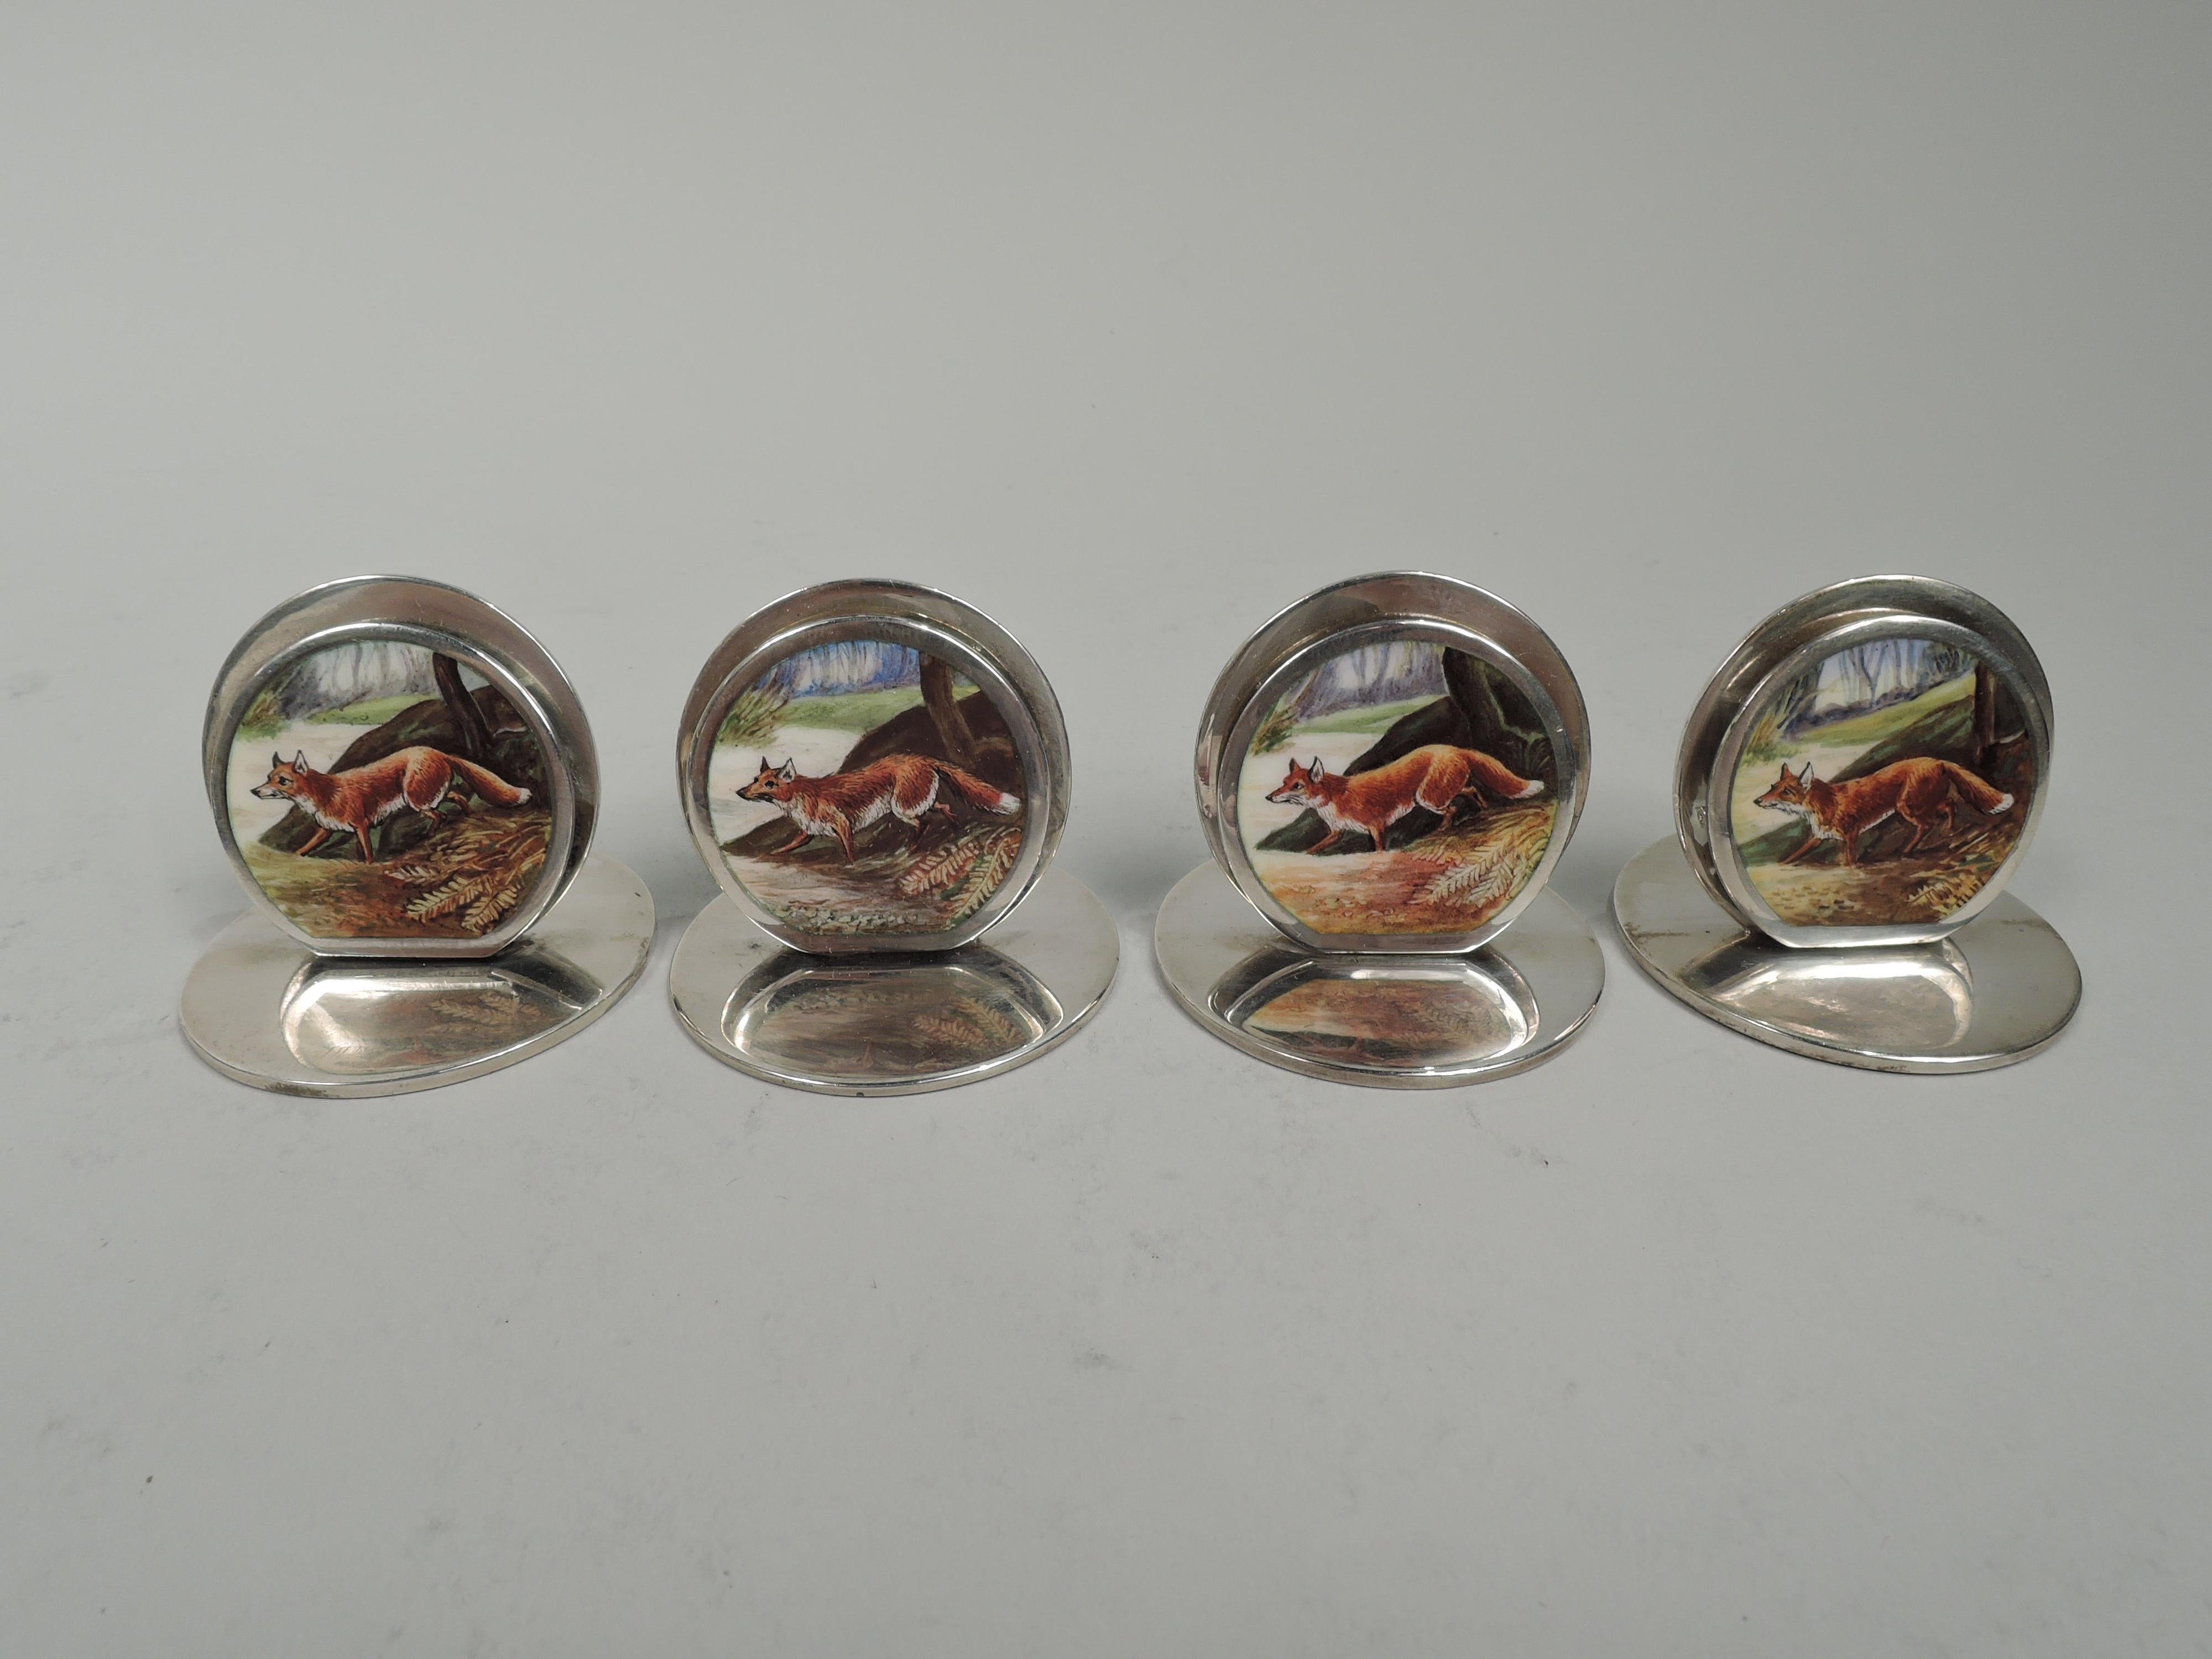 Set of 4 Edwardian sterling silver place card holders. Made by Sampson Mordan & Co. Ltd. in Chester, 1904-6. Each: Two flat discs mounted to flat and circular base. Front disc smaller and enameled with fox loping through forest. In leather-bound